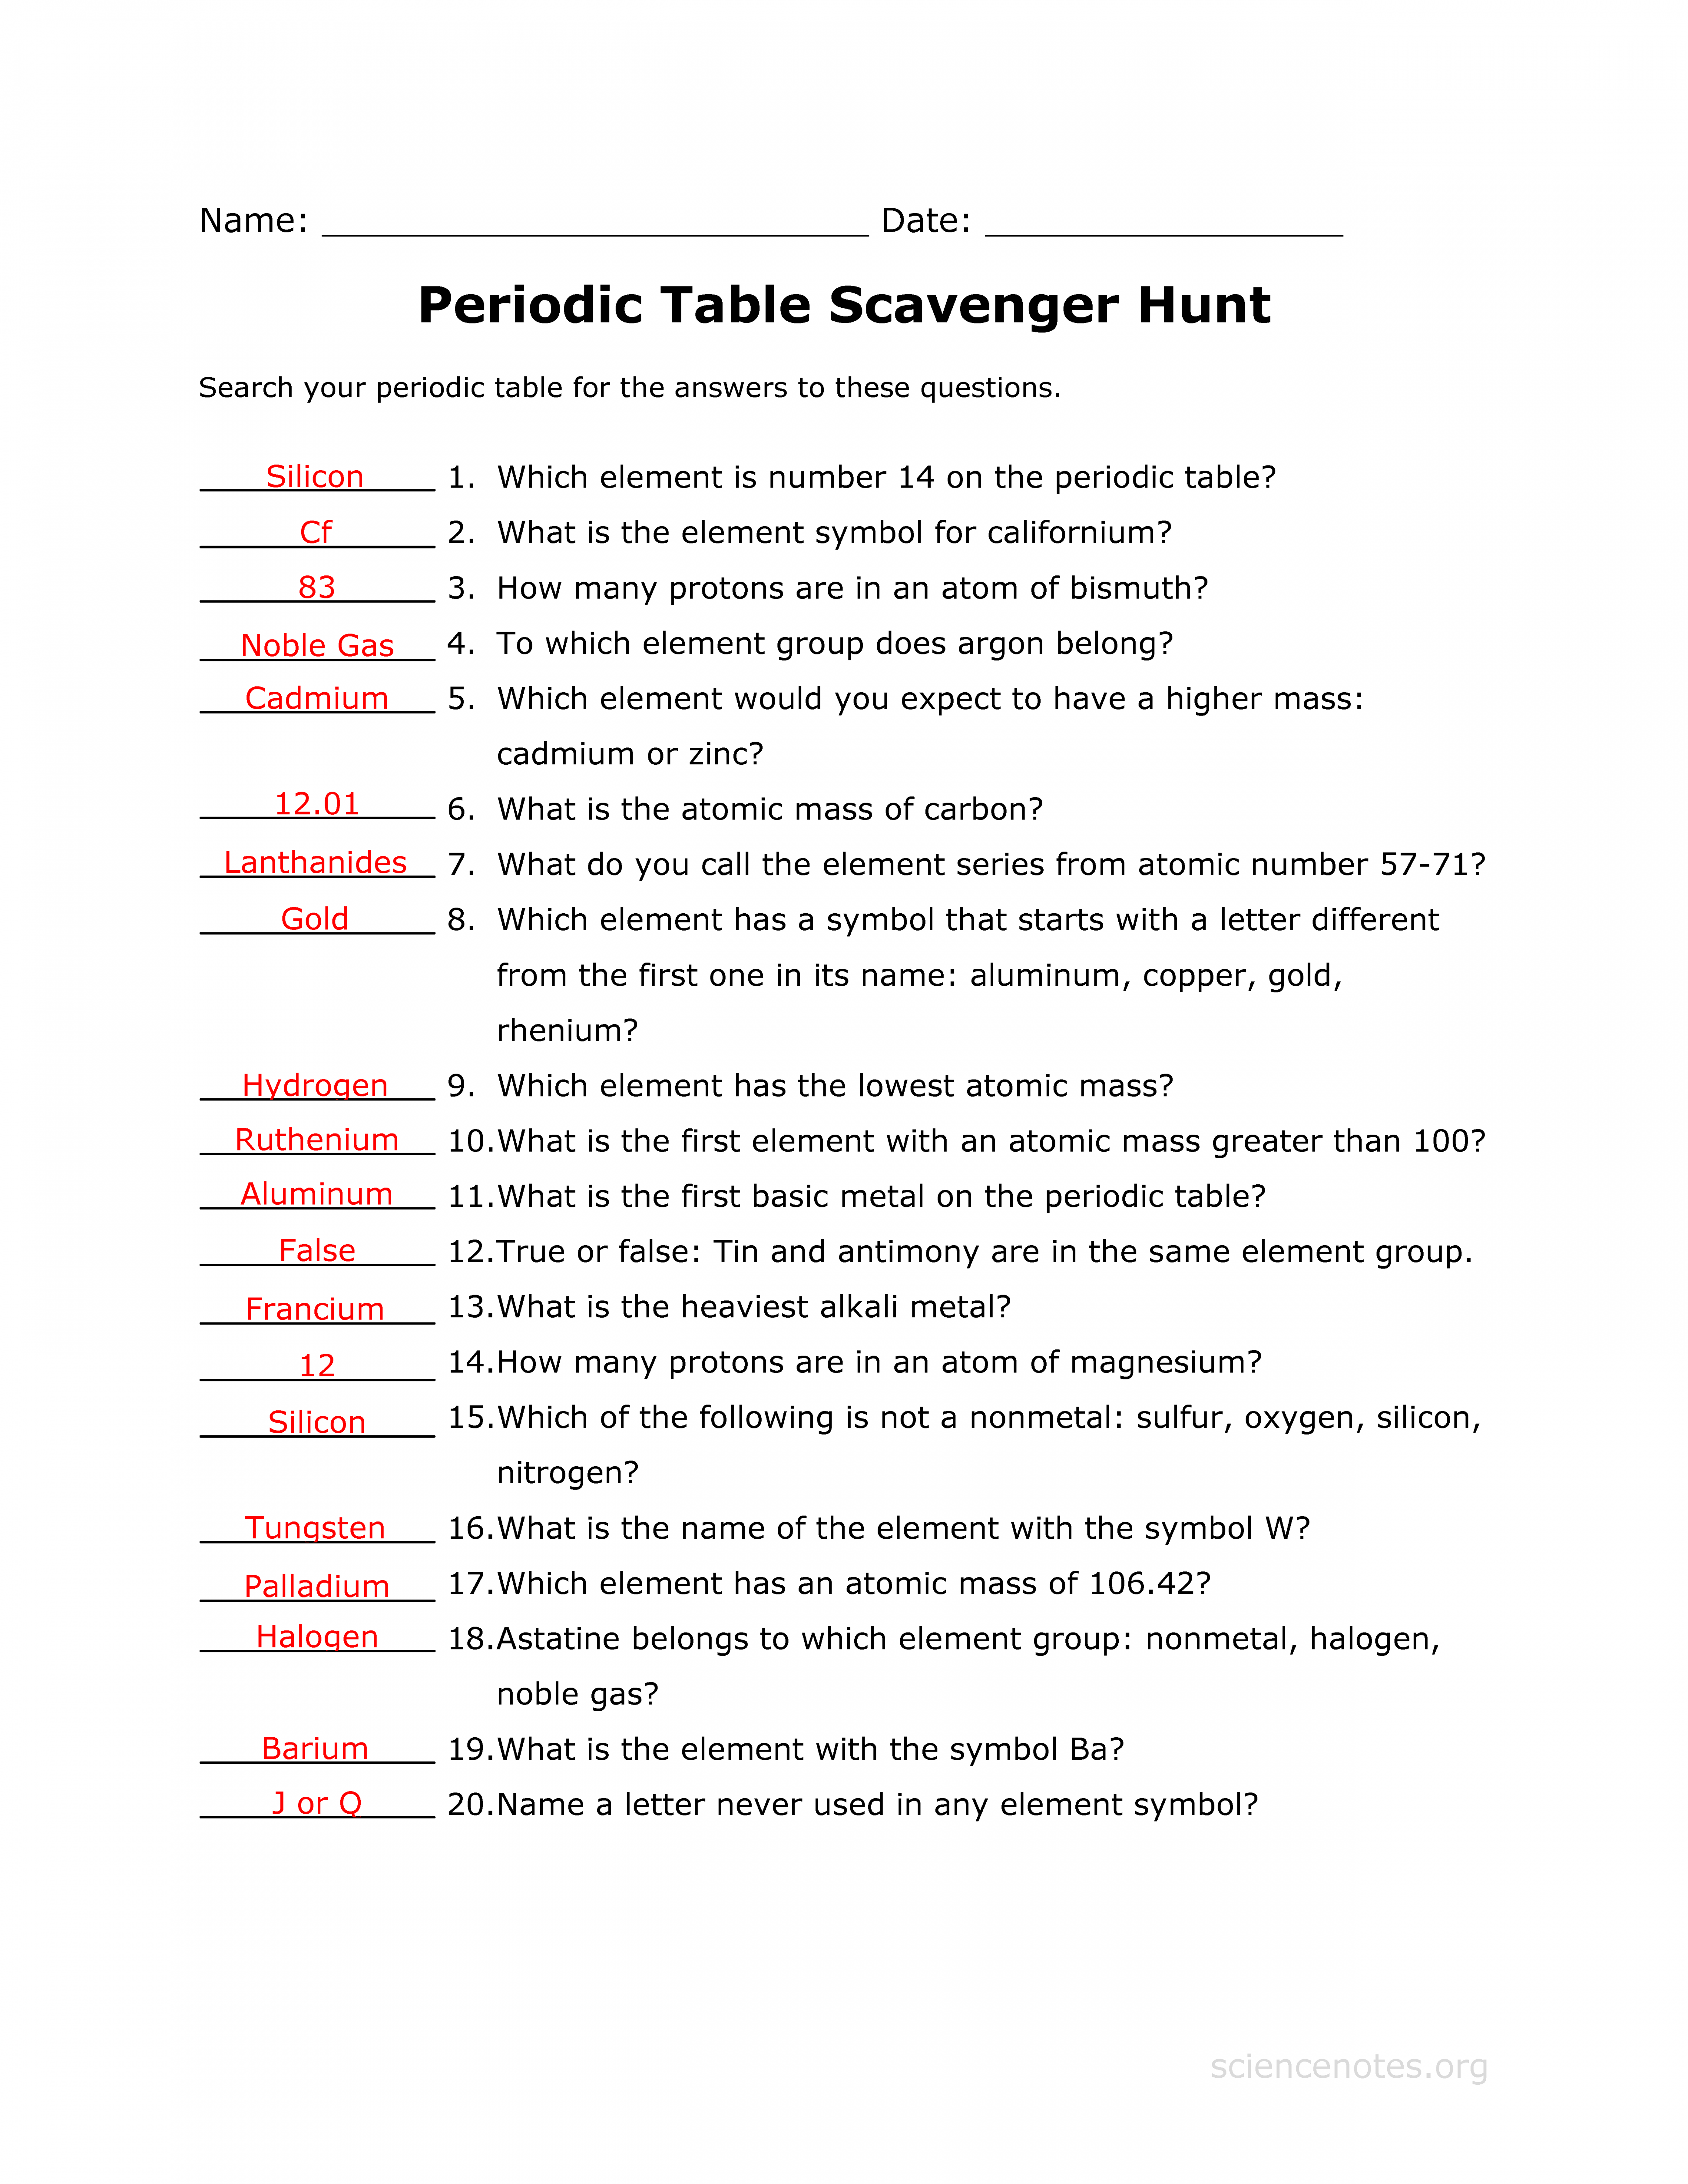 Answer key to the Periodic Table Scavenger Hunt Worksheet